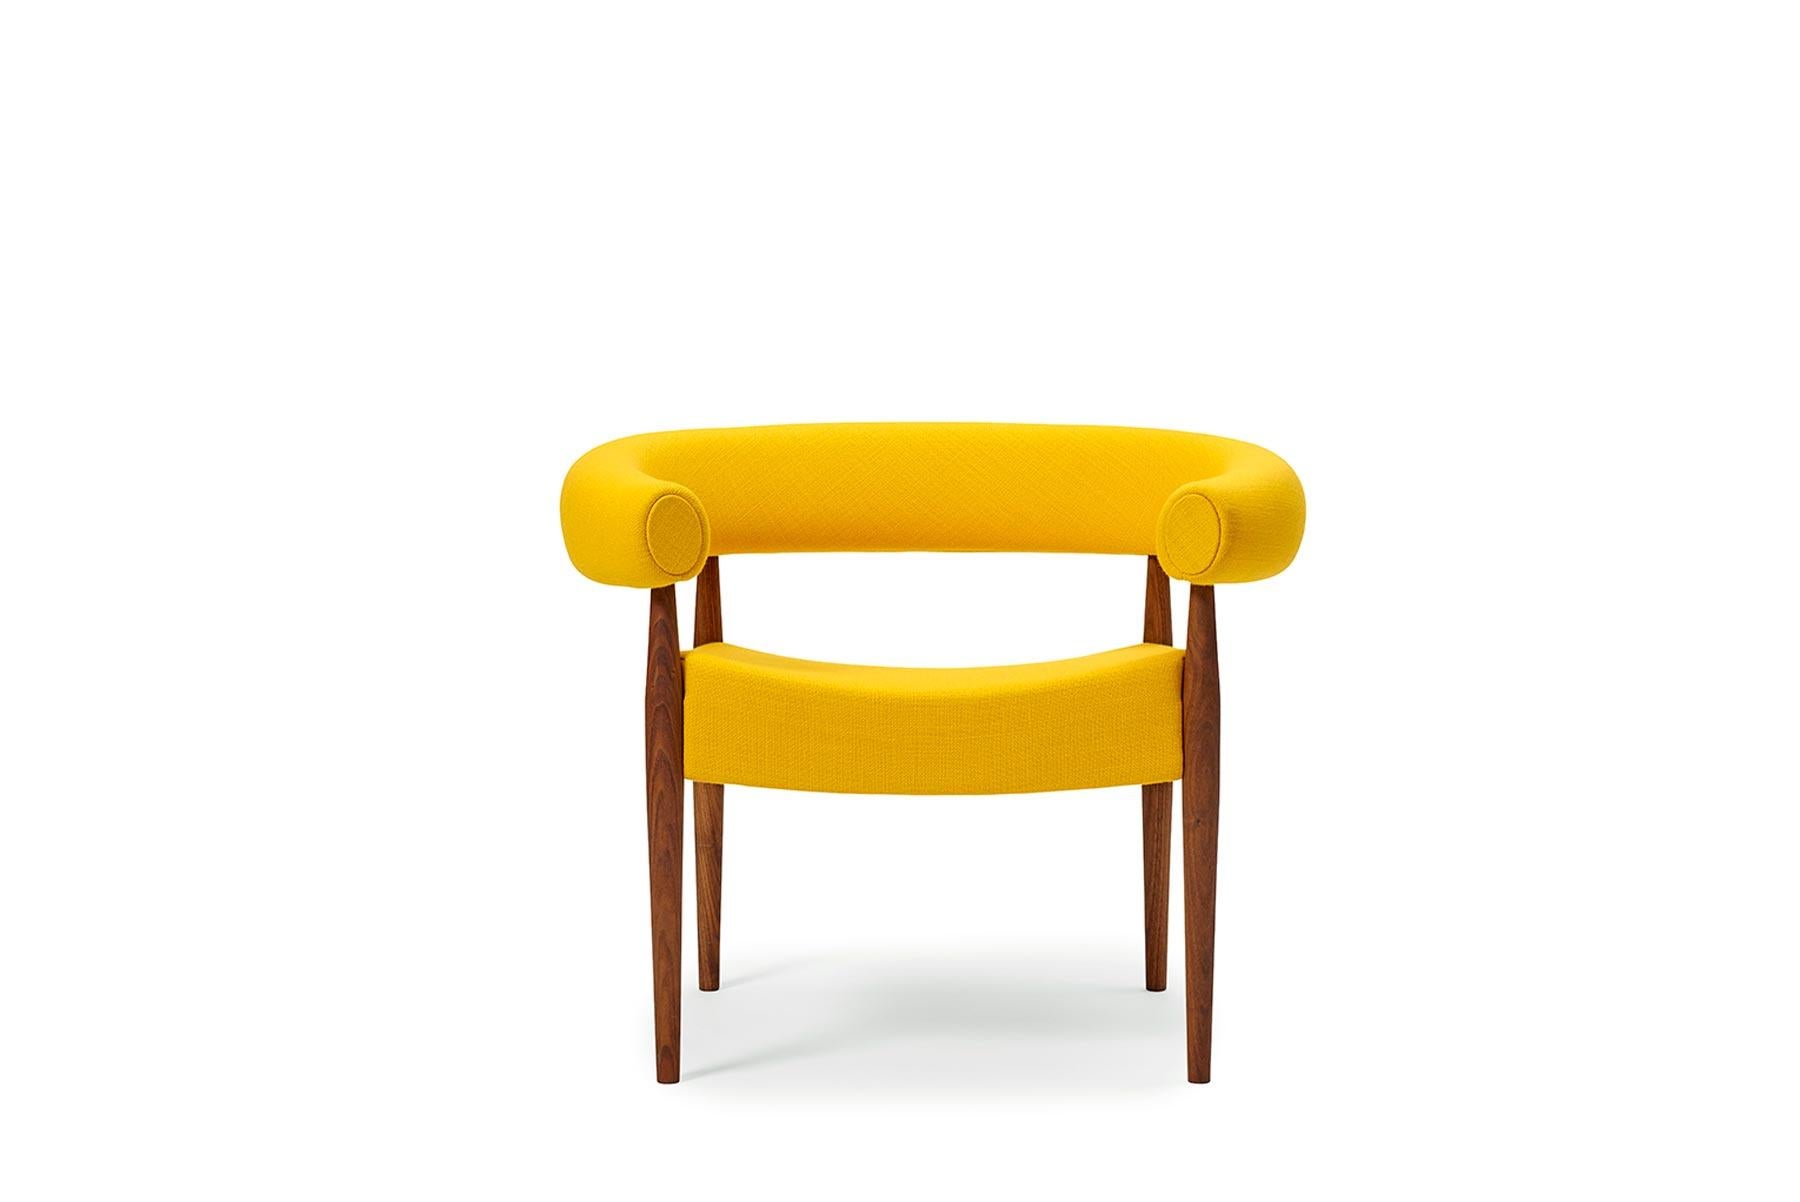 Designed by Nanna and Jørgen Ditzel in 1958, the Ring Chair is one of the couple’s most elegant and iconic designs. The chair is handcrafted at GETAMA’s factory in Gedsted, Denmark by skilled cabinetmakers using traditional Scandinavian